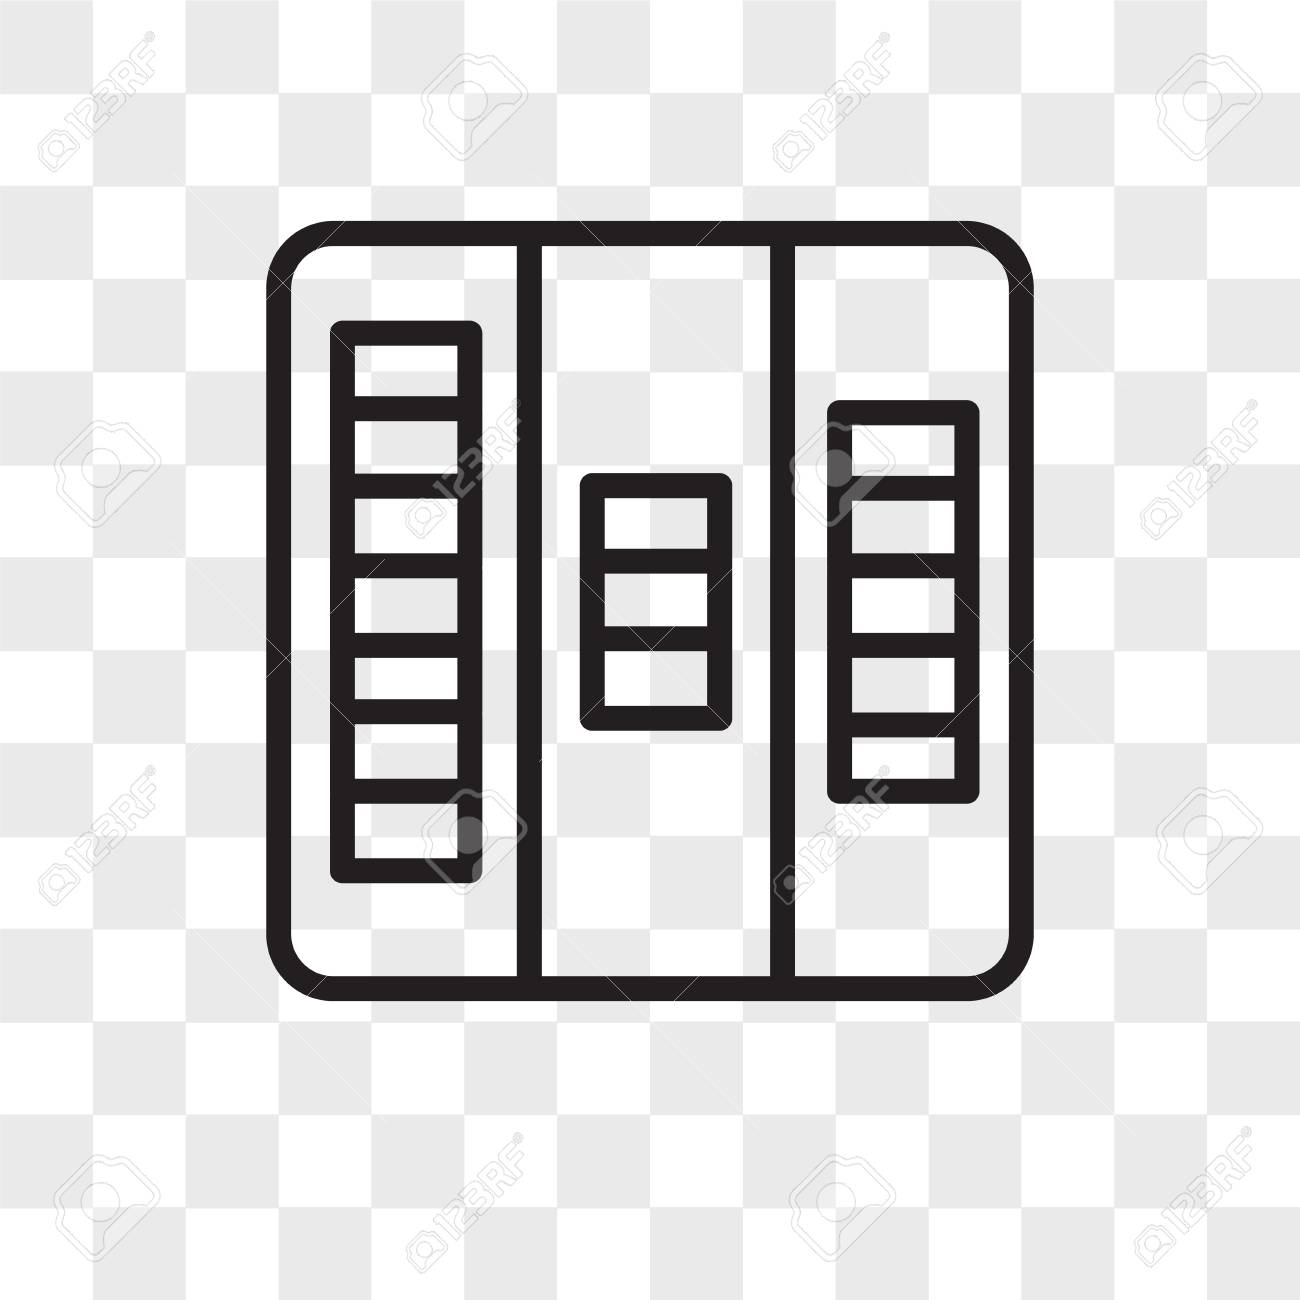 Kanban Vector Icon Isolated On Transparent Background